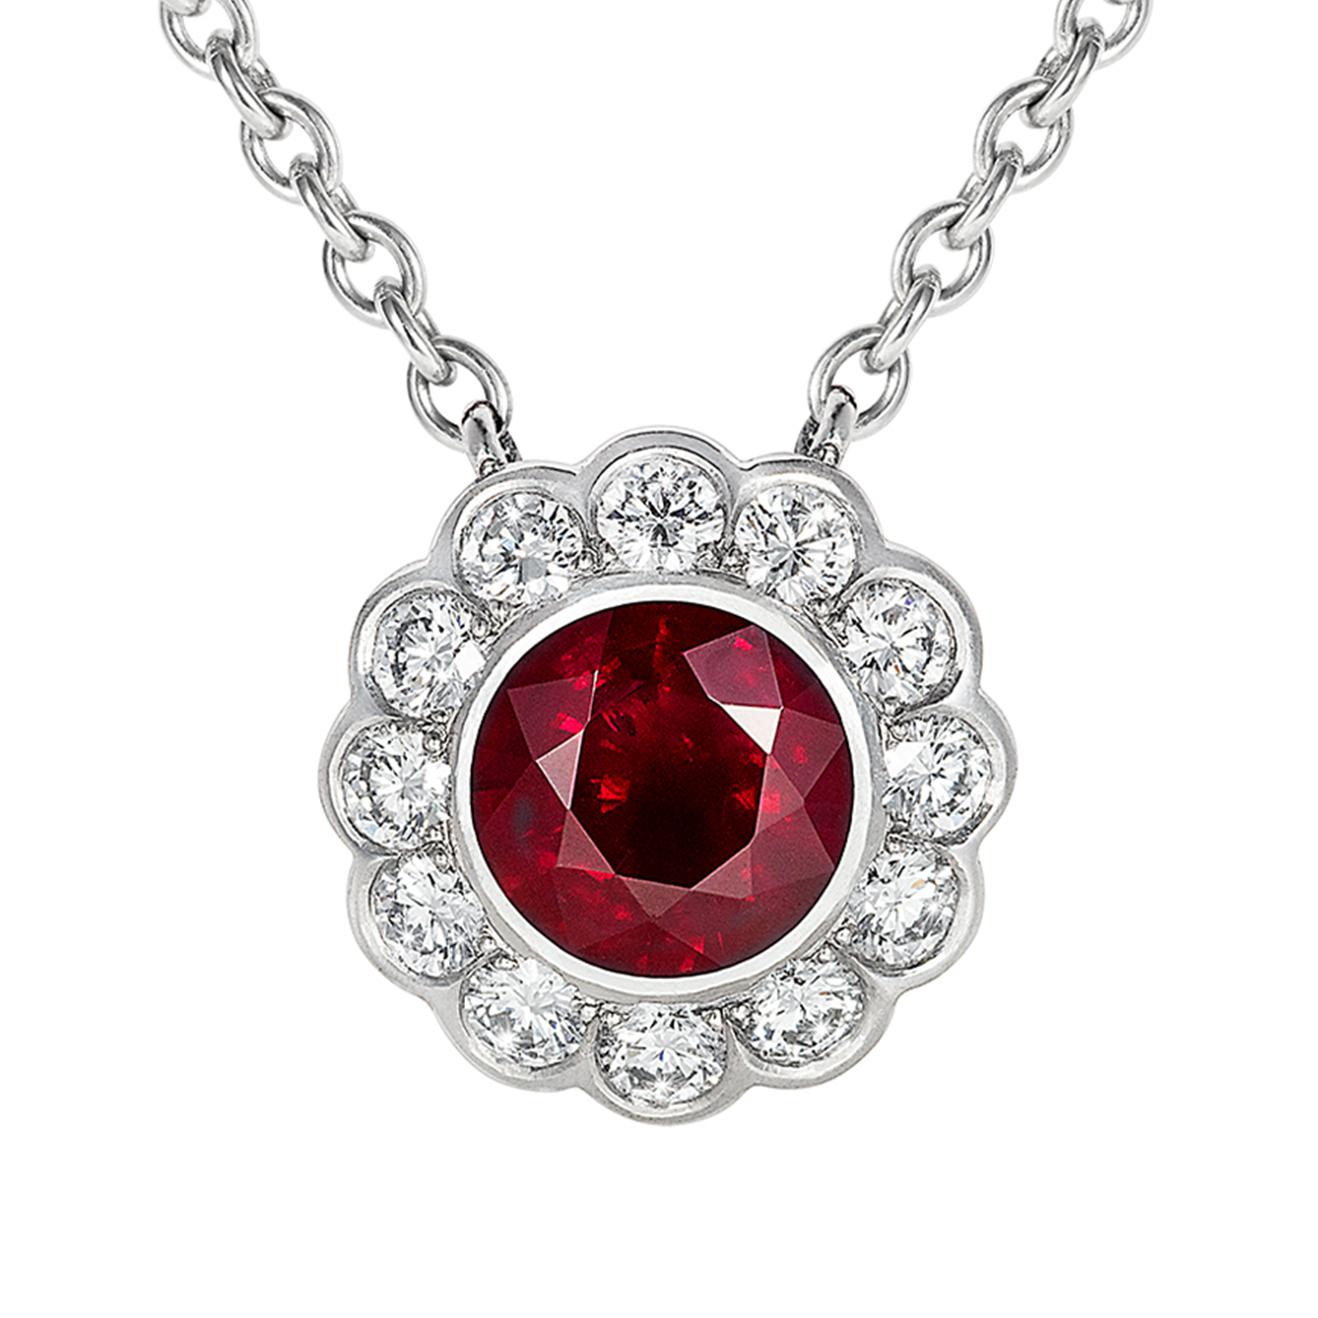 This beautiful ruby and diamond Carnation pendant features a beautiful ruby of perfect colour, weighing approximately 1.04 carats surrounded by a pretty halo of brilliant cut diamonds that weigh approximately 0.37 carats. This beautiful pendant is